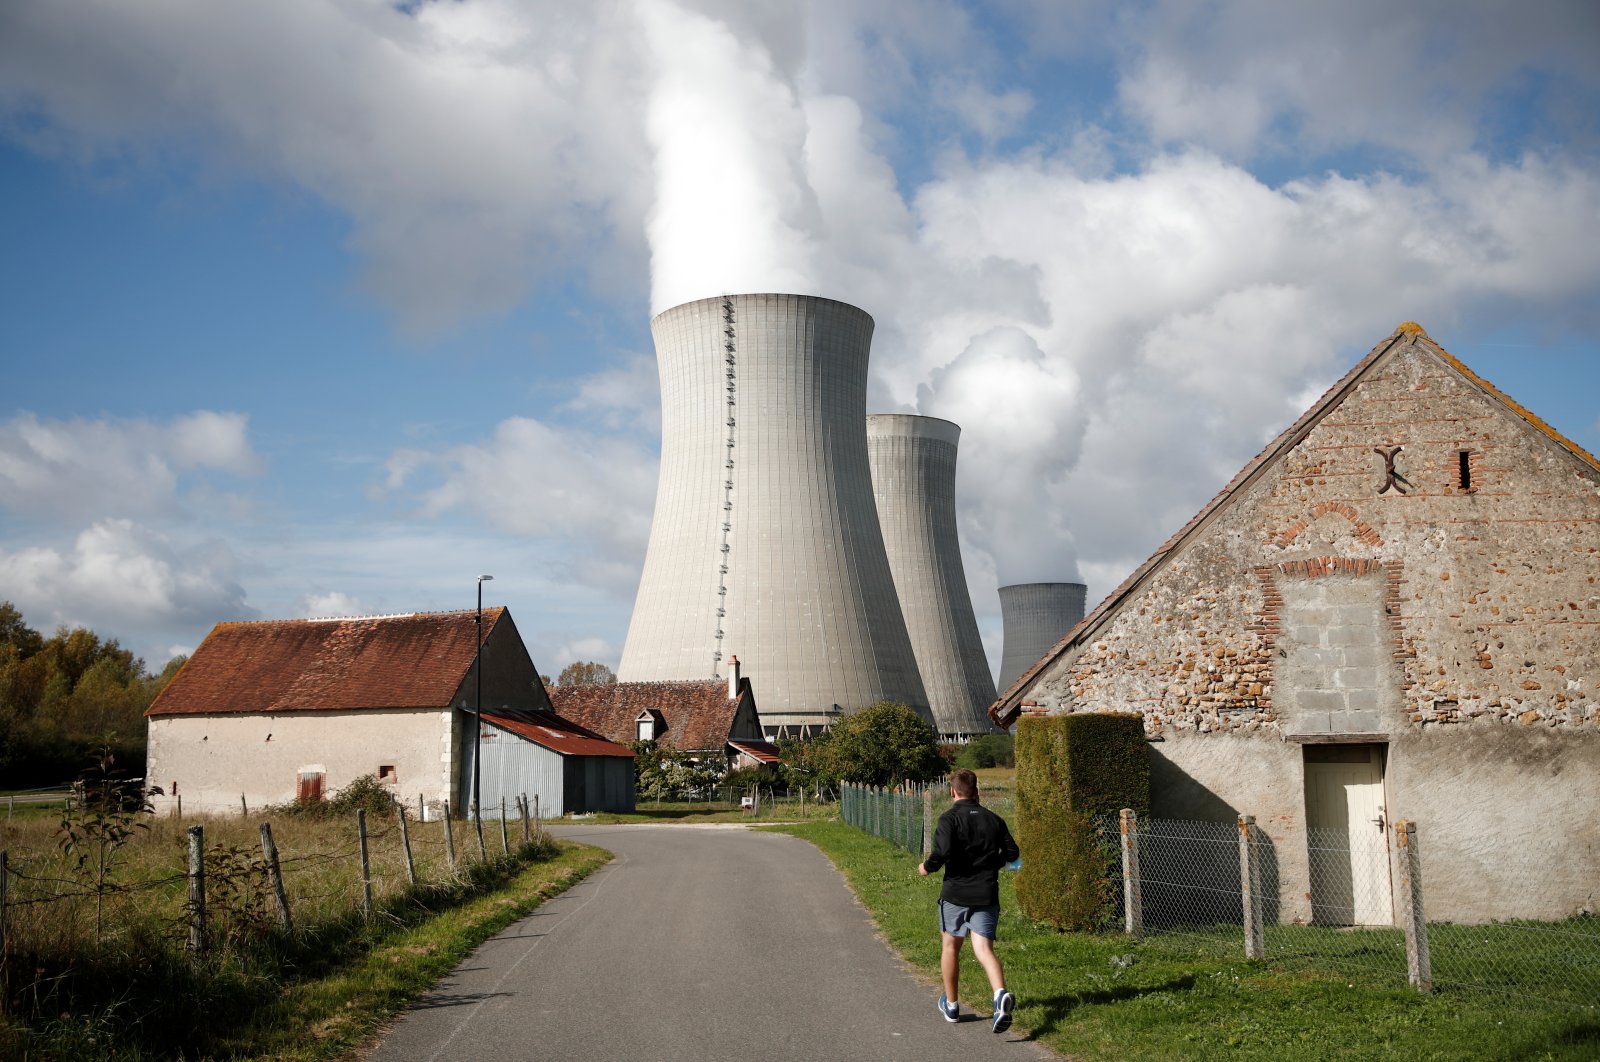 Steam rises from cooling towers of the Electricite de France (EDF) nuclear power plant behind houses in Dampierre-en-Burly, France, Oct. 12, 2021. (Reuters Photo)